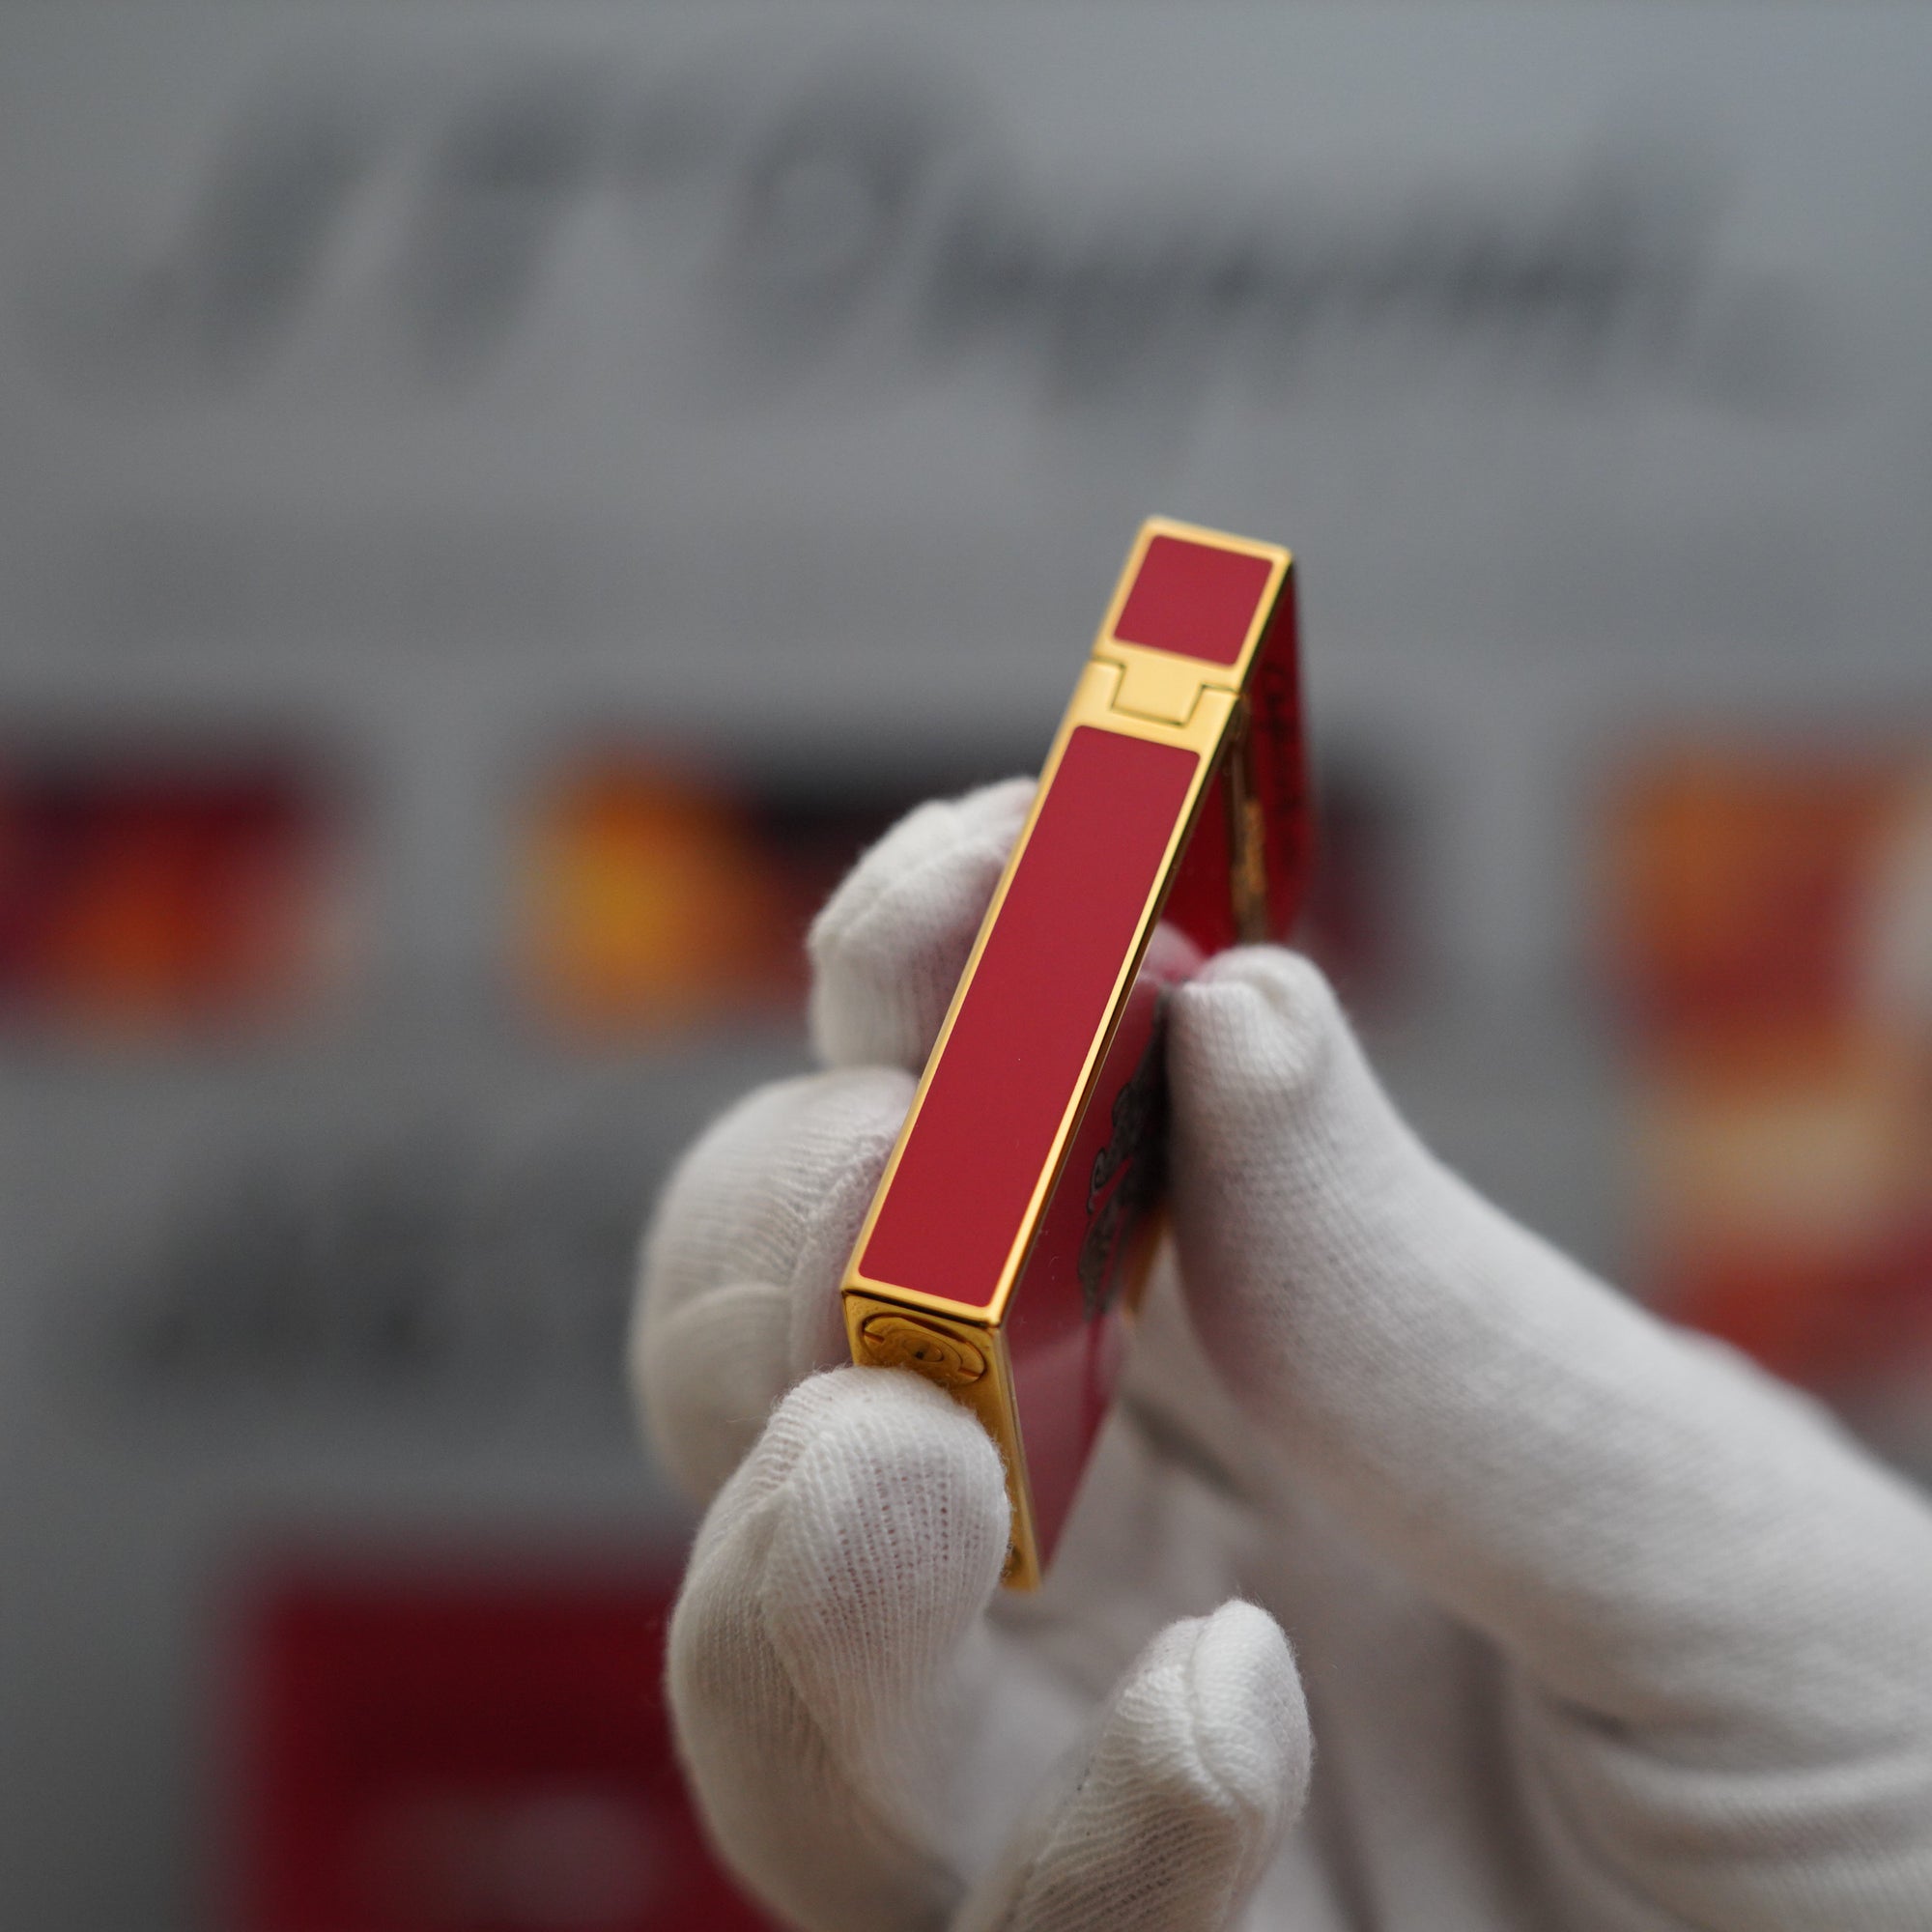 Vintage 1990 S.T. Dupont 18k Dual Flame Opus X Fuente Limited Gold Plated Red Lacquer Lighter